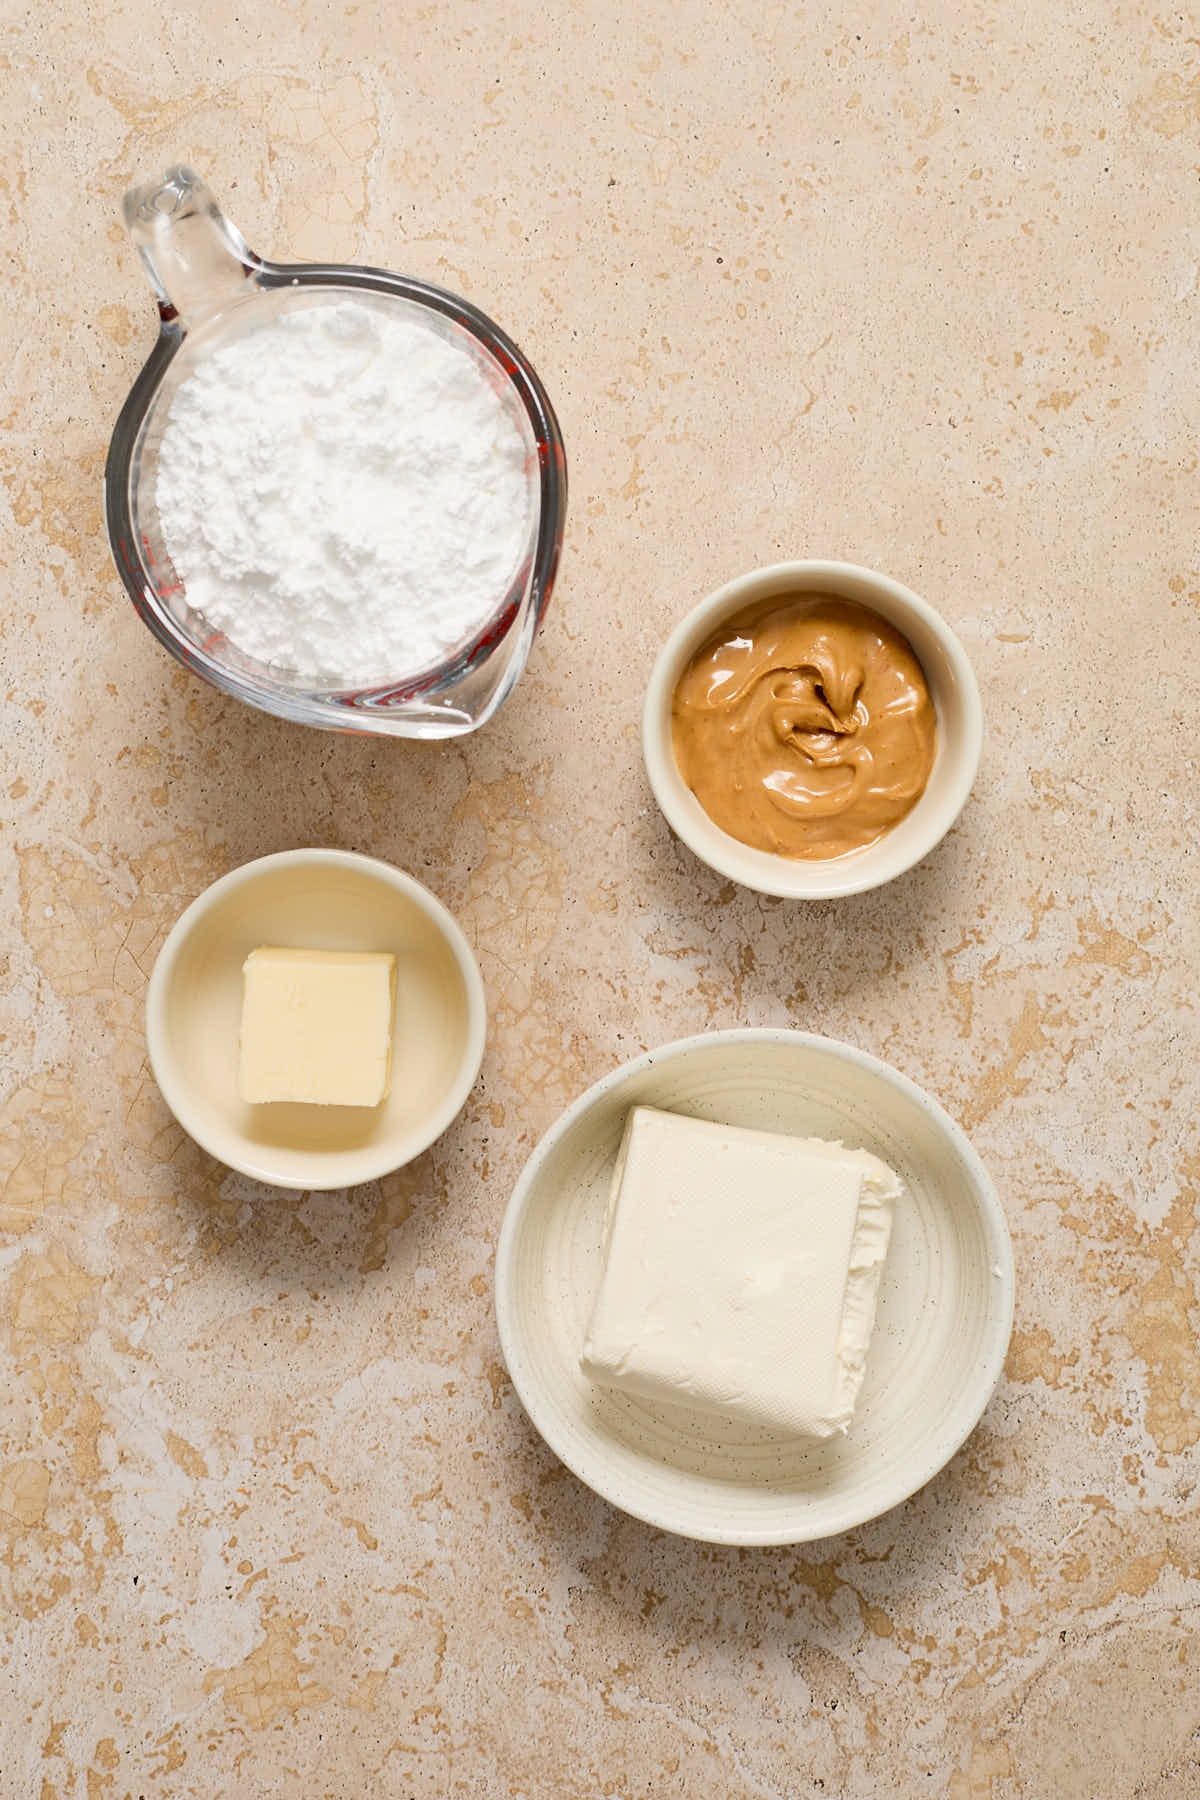 Ingredients to make peanut butter cream cheese frosting arranged in individual bowls.